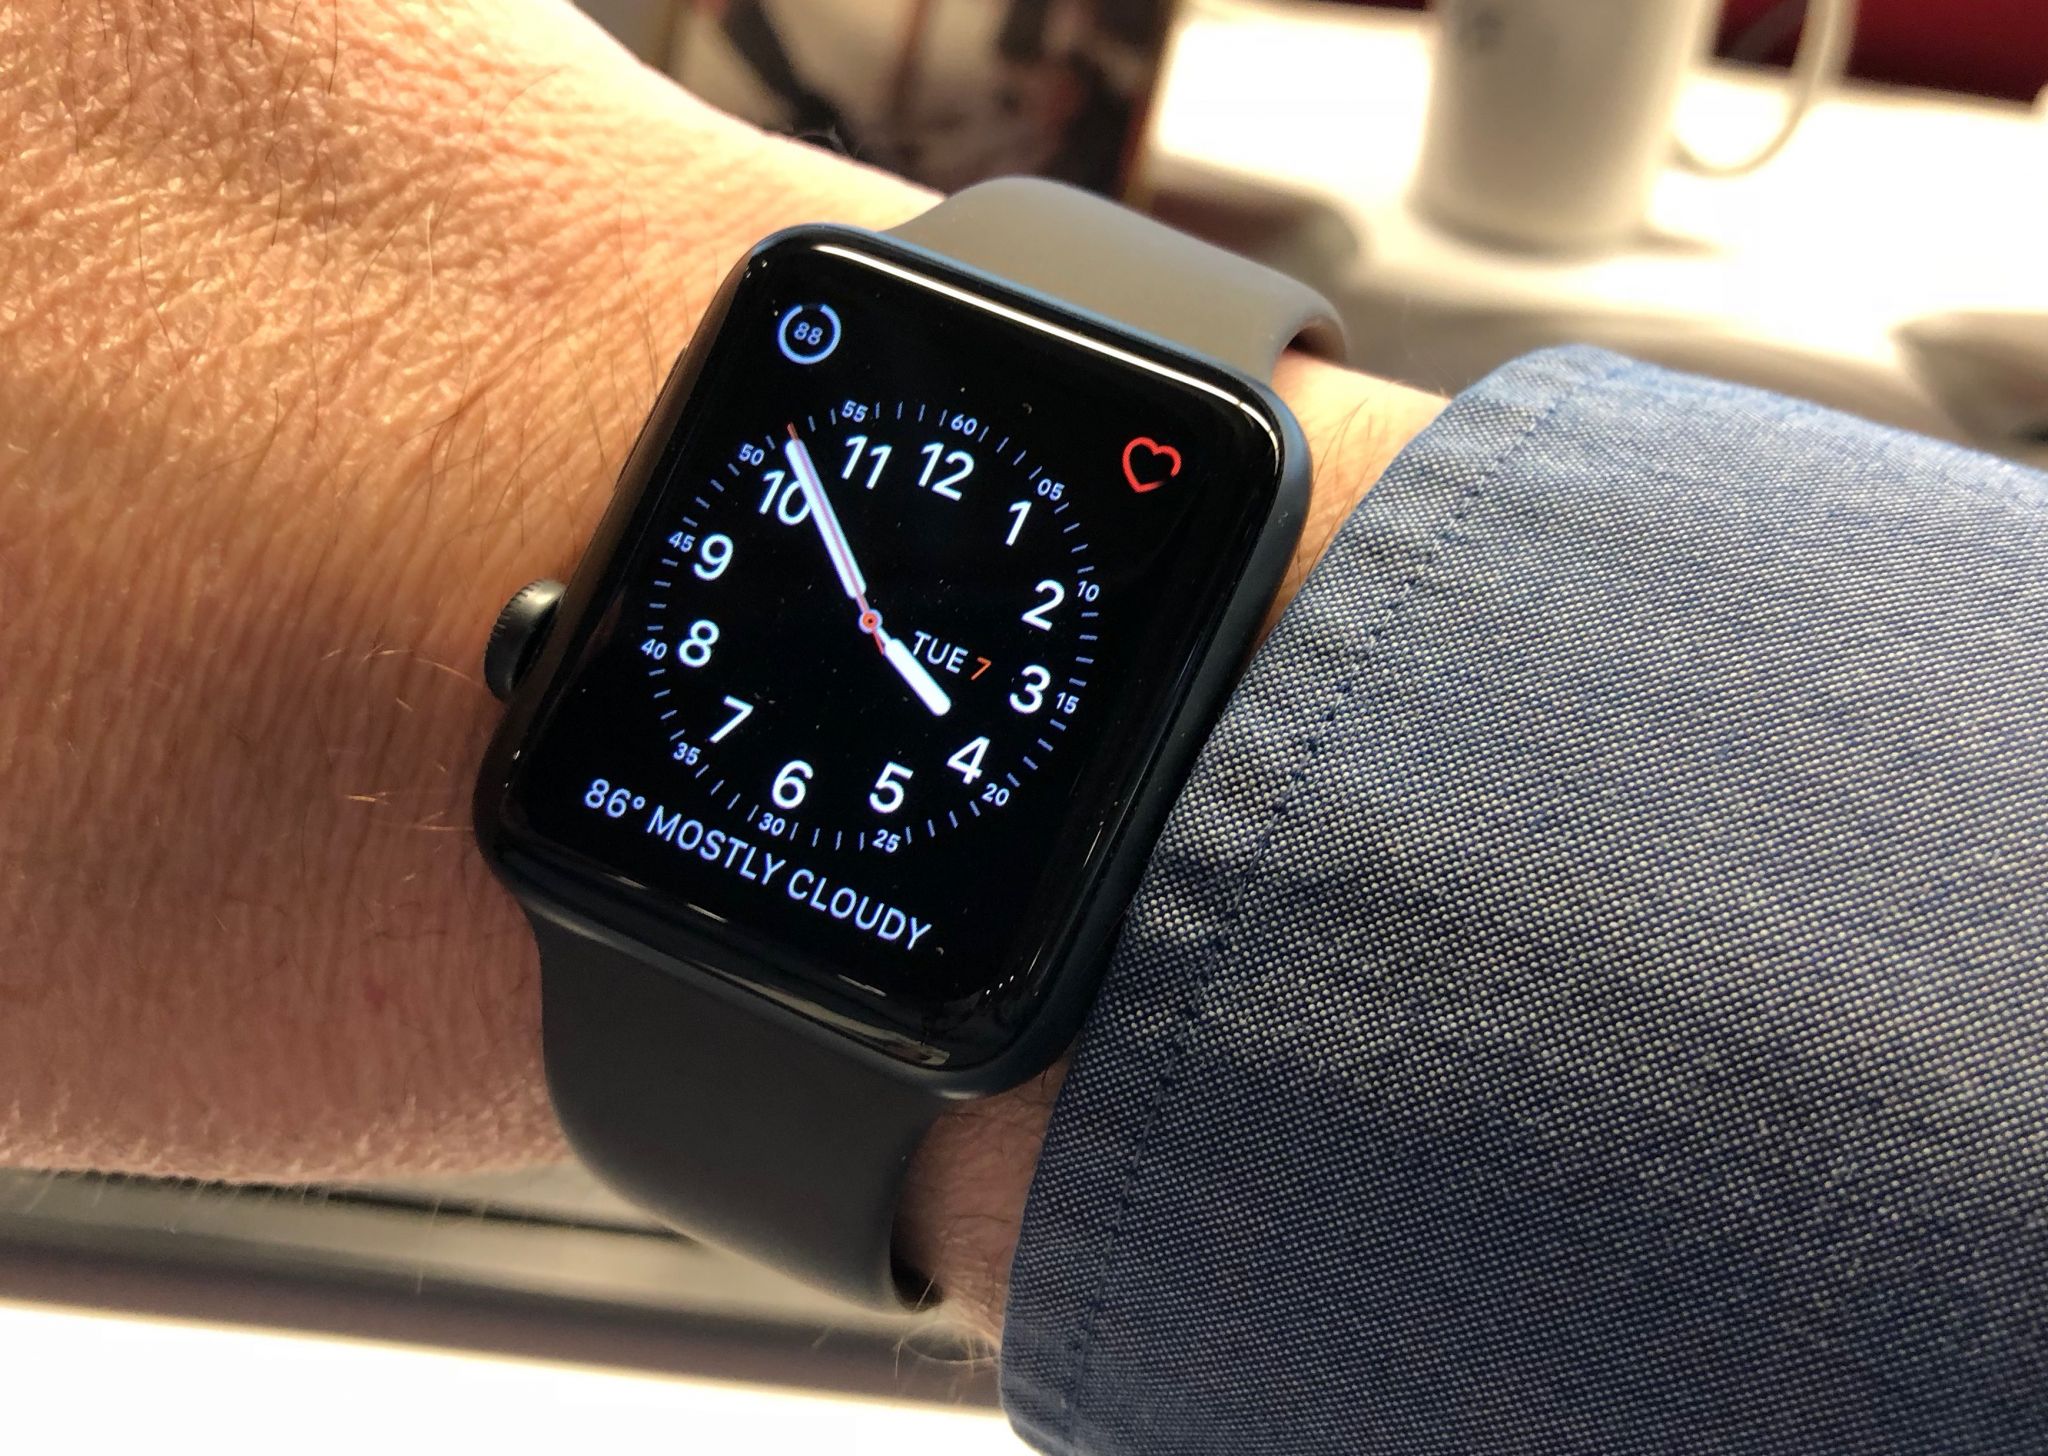 The best thing about the Apple Watch 